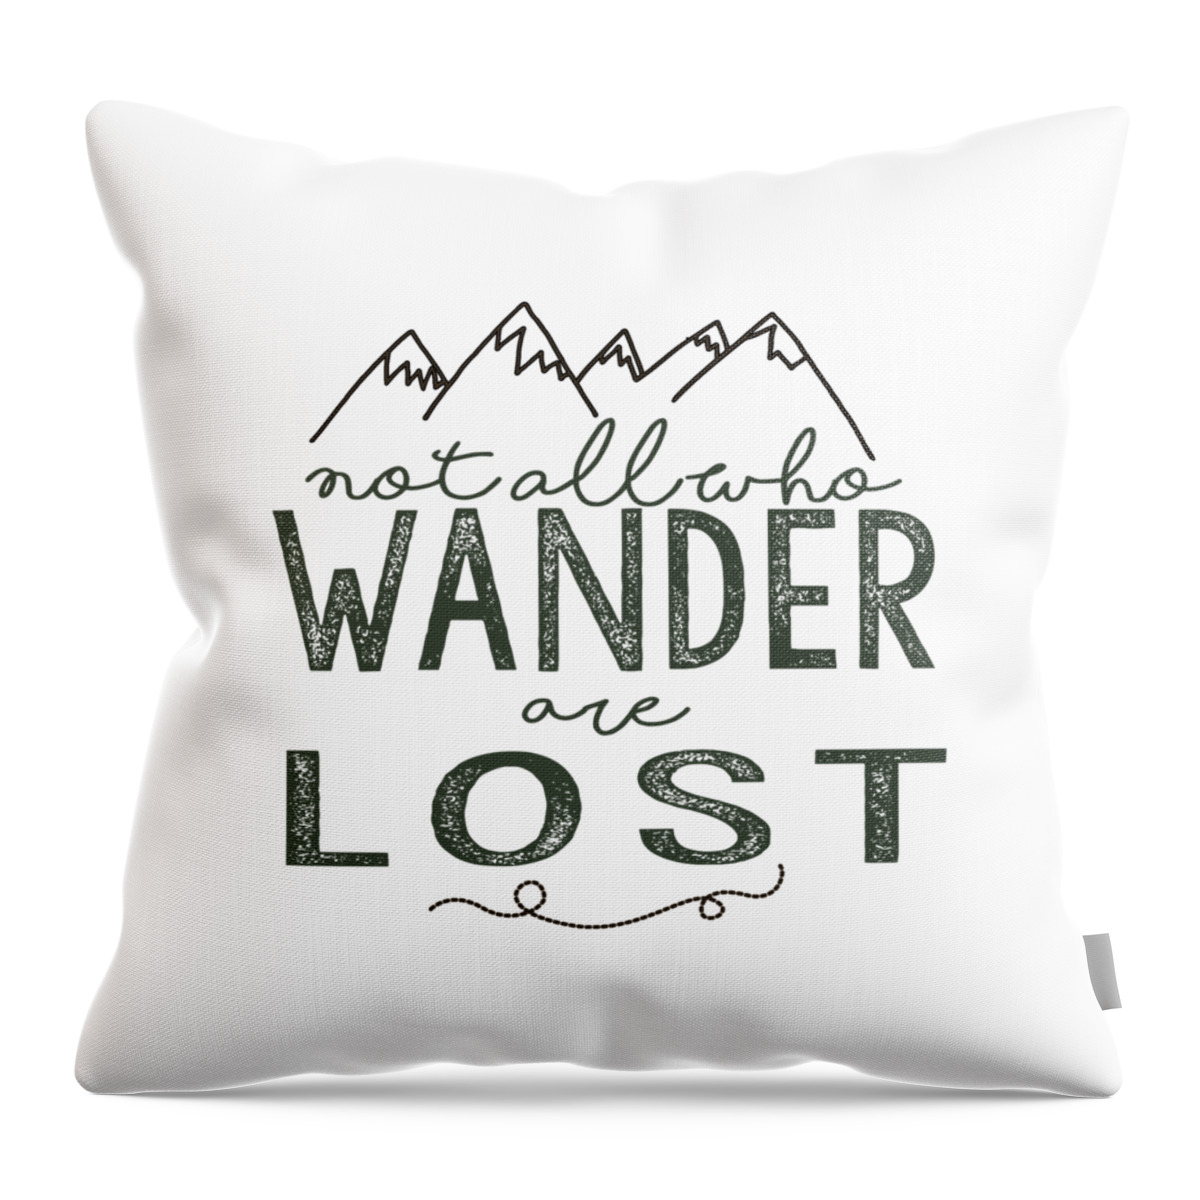 Not All Who Wander Are Lost Throw Pillow featuring the digital art Not All Who Wander Green by Heather Applegate